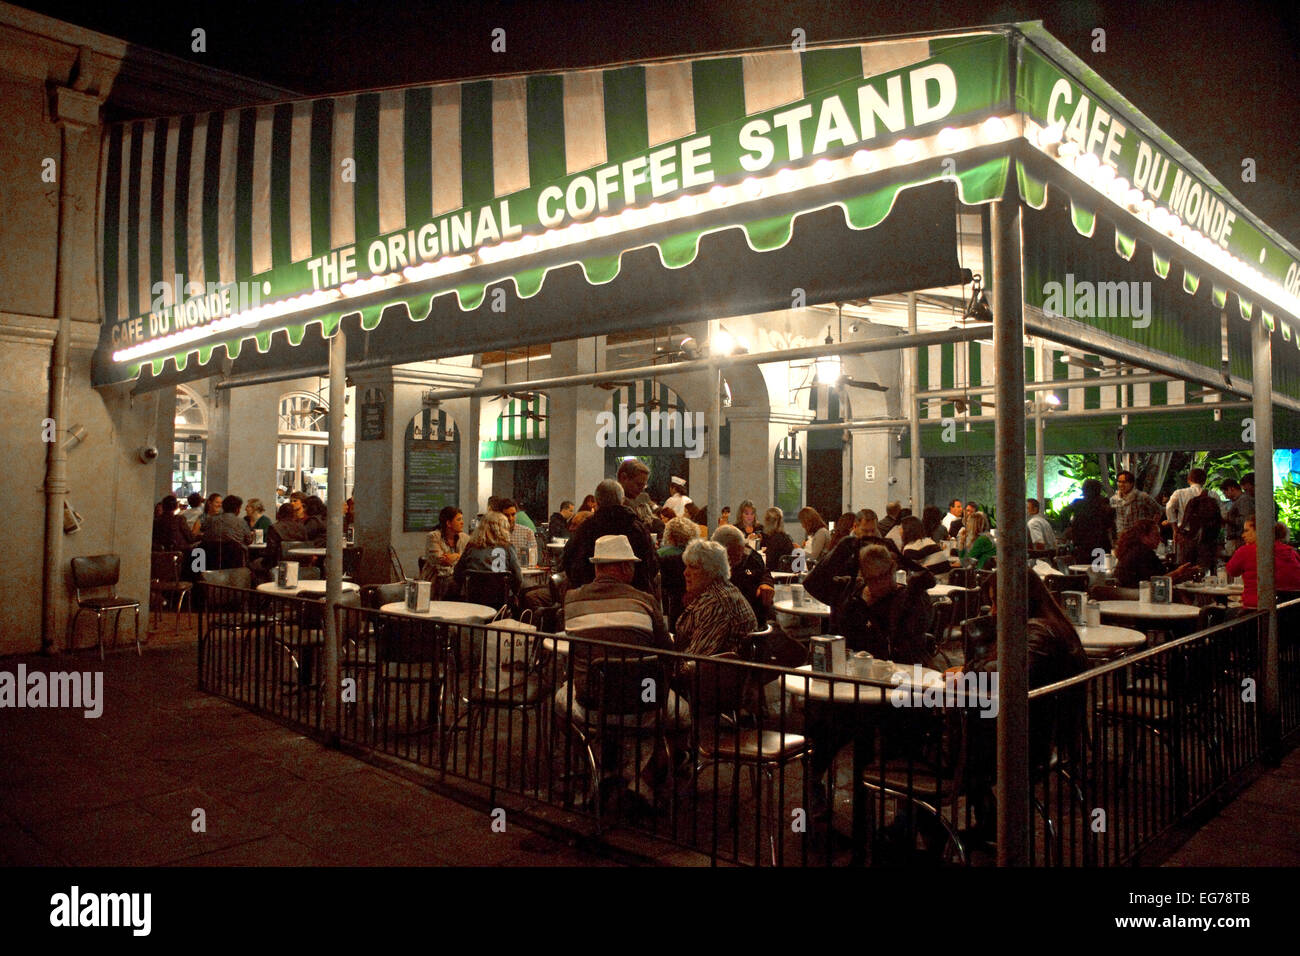 Exterior of Cafe Du Monde in the French Quarter, New Orleans, Louisiana ...